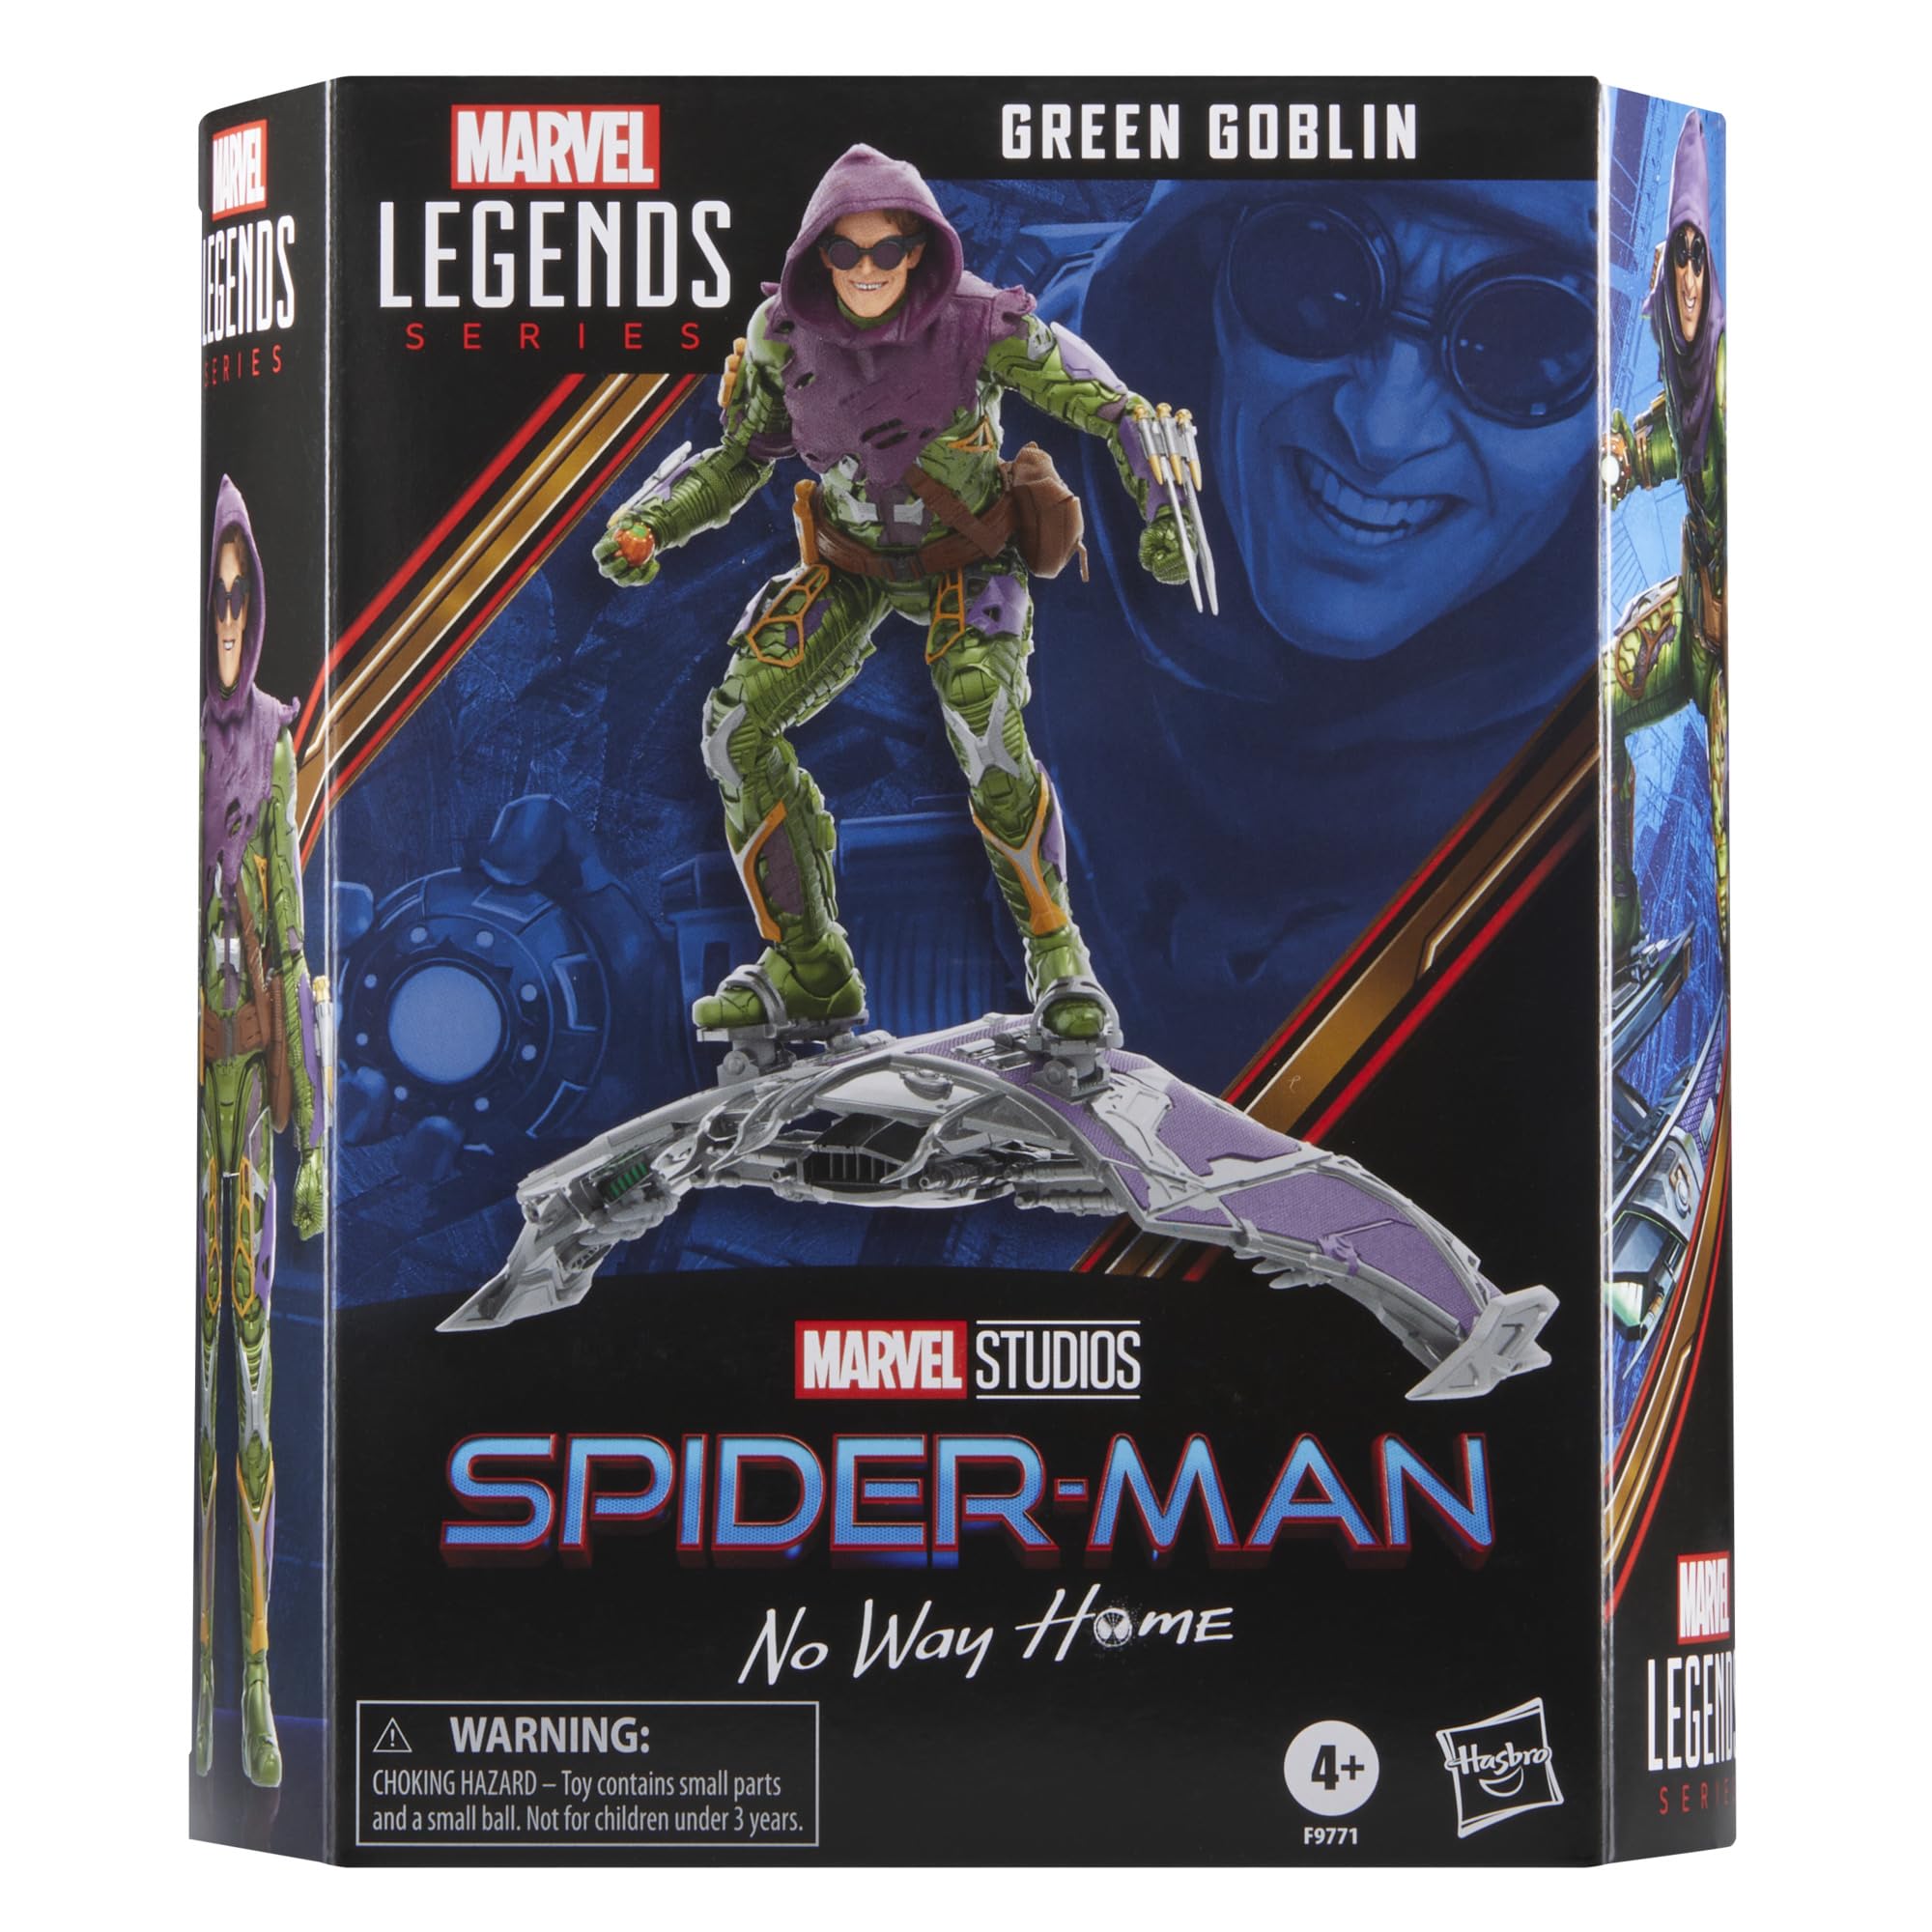 Marvel Legends Green Goblin and Spider-Man No Way Home Deluxe 6-Inch Action Figures With 6 Accessories